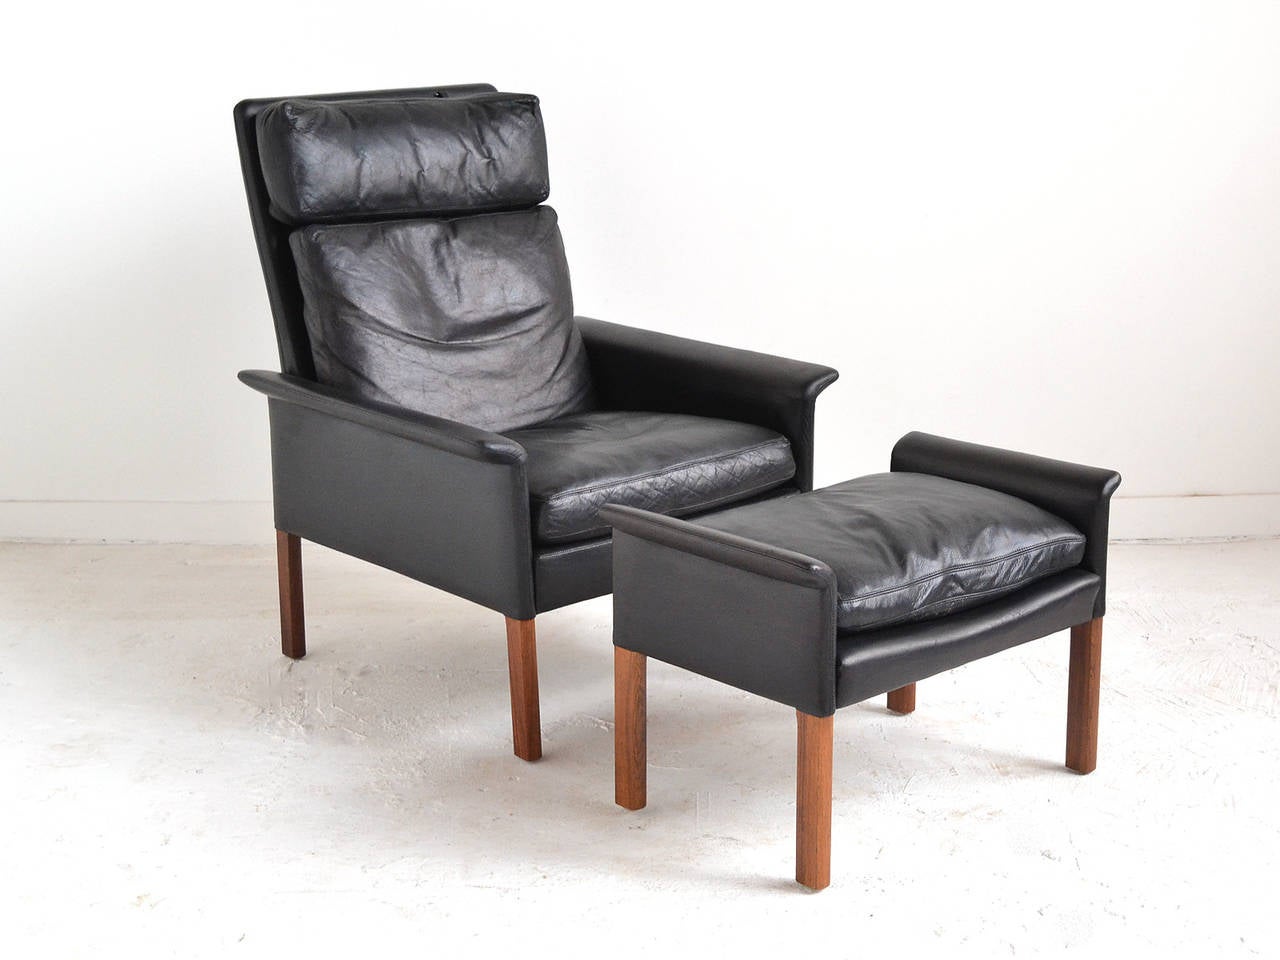 This model 500H high back lounge chair and ottoman are beautiful with their Classic lines and great proportions, but even its fine appearance is bested by its incredible comfort. Plush down-filled cushions offer a sumptuous seat and the lumbar